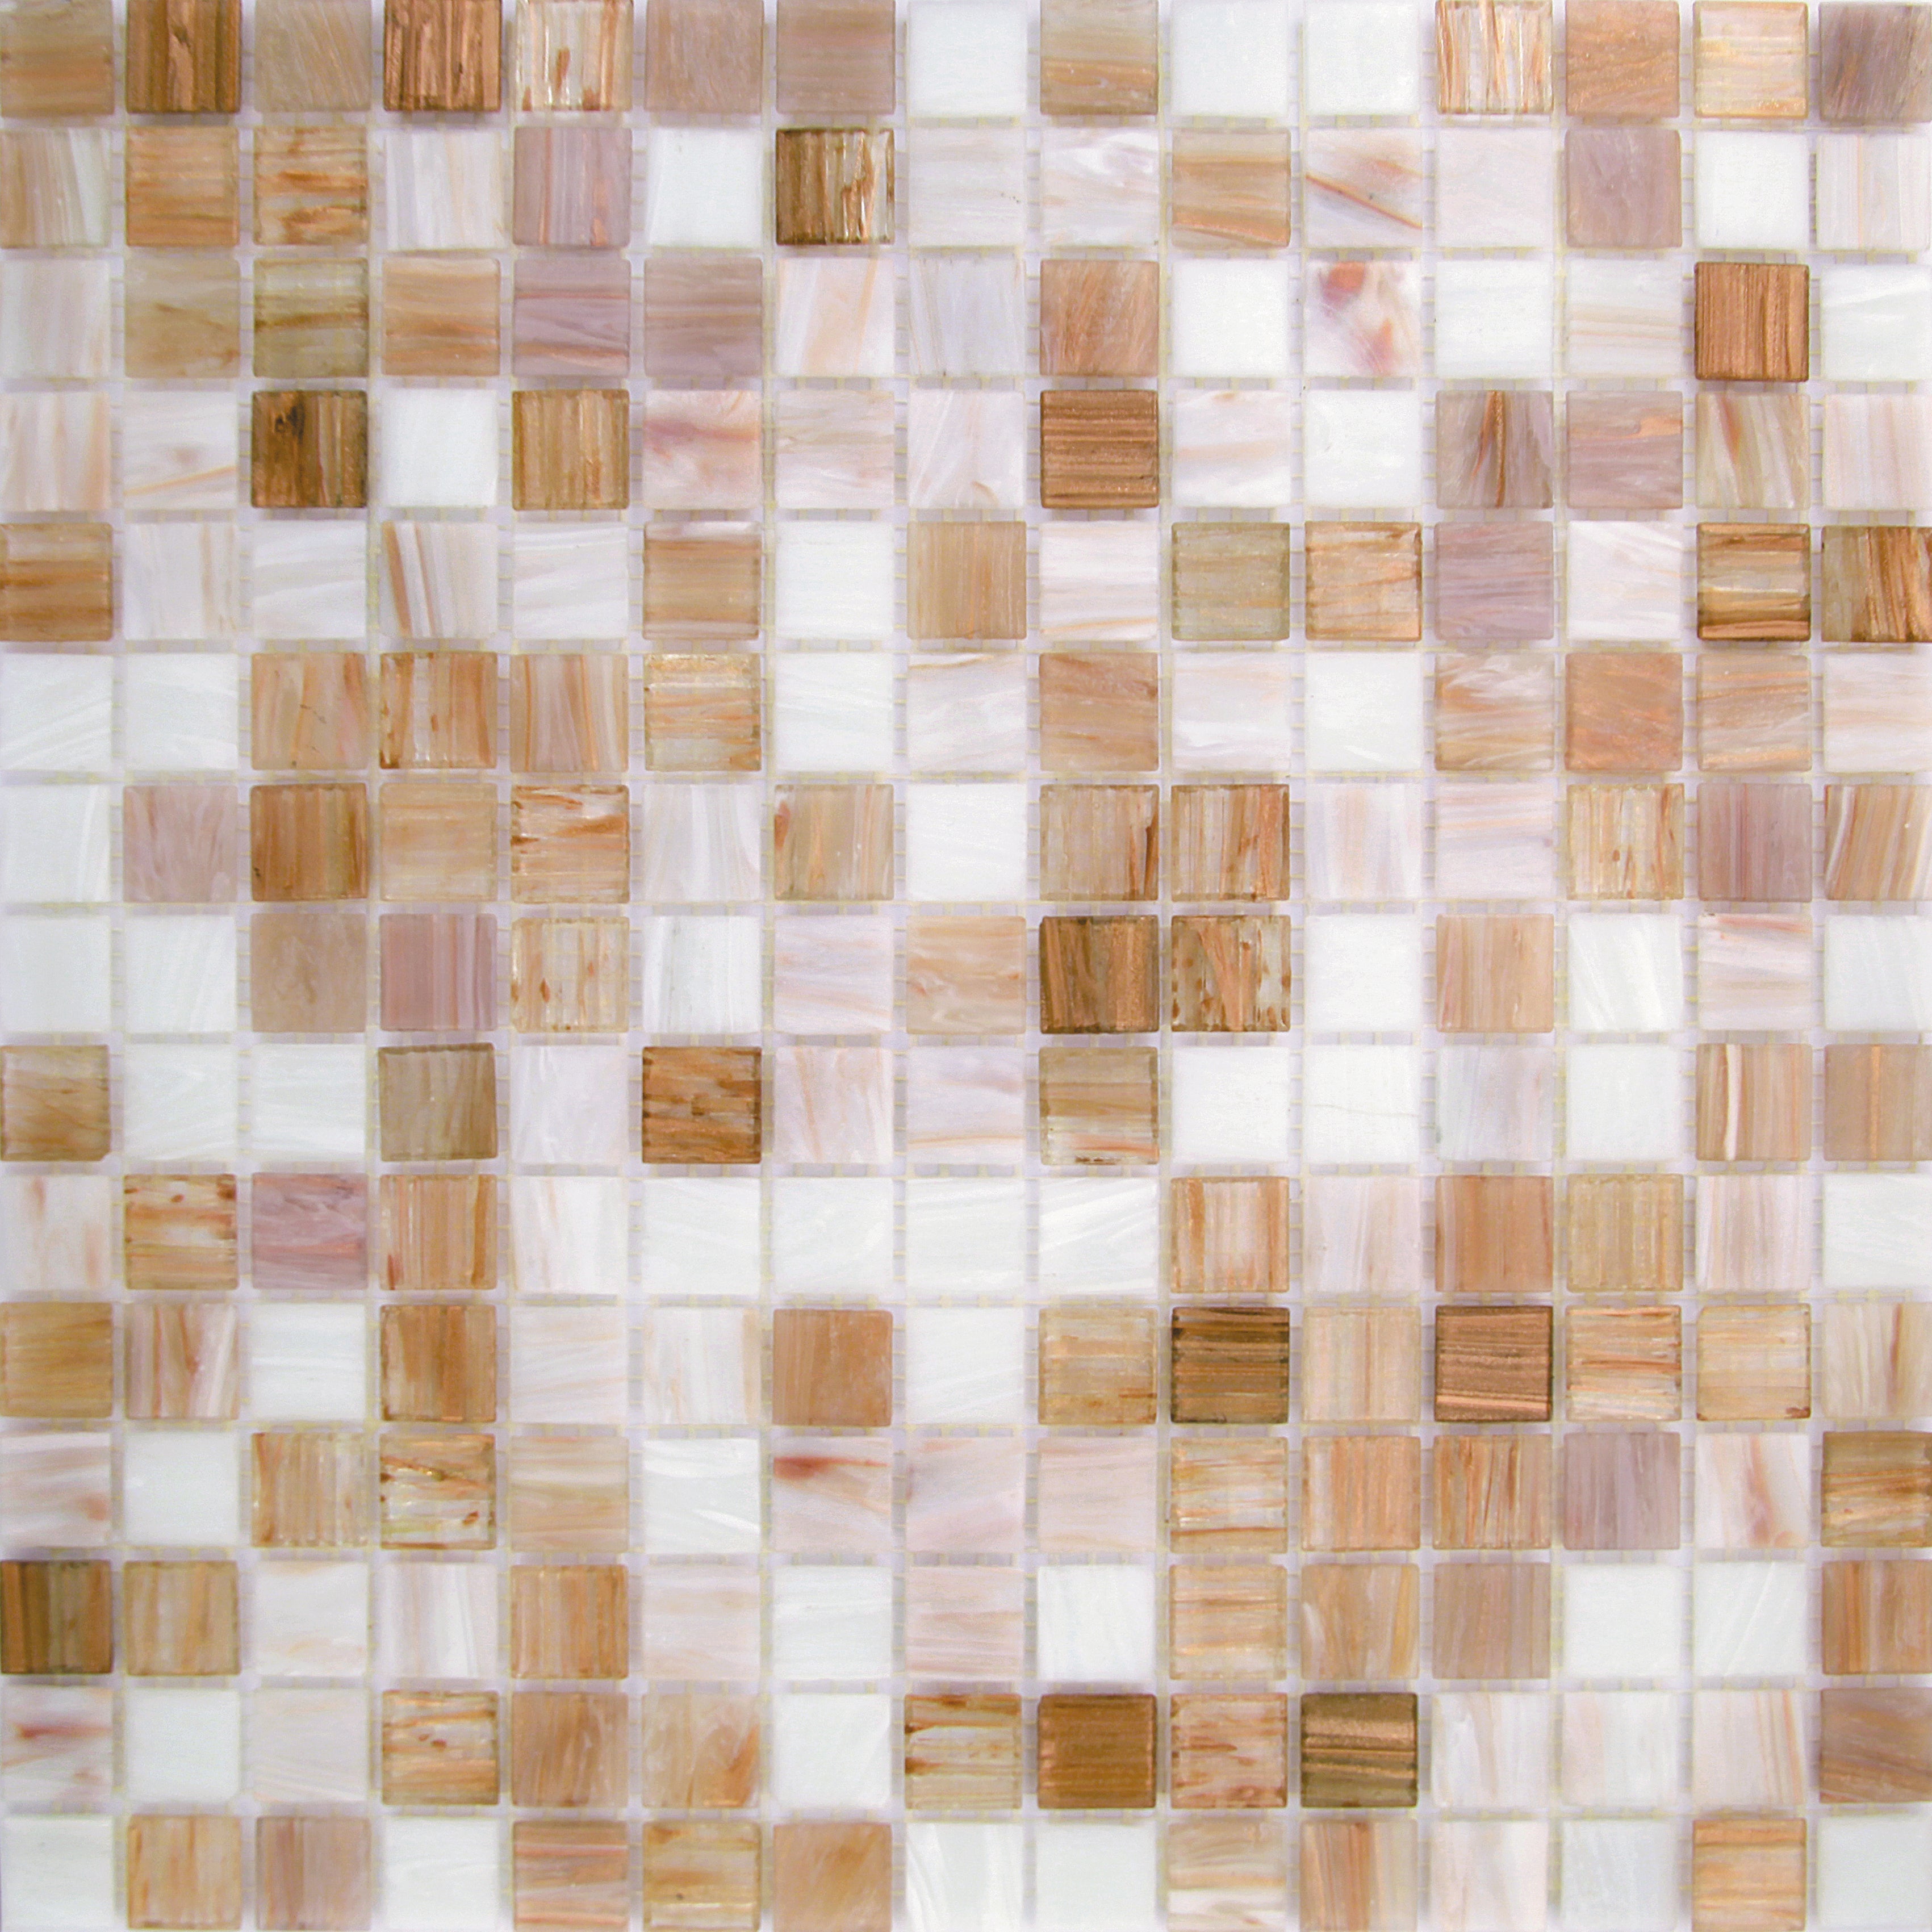 mir alma mix 0_8 inch cn 936 2 wall and floor mosaic distributed by surface group natural materials